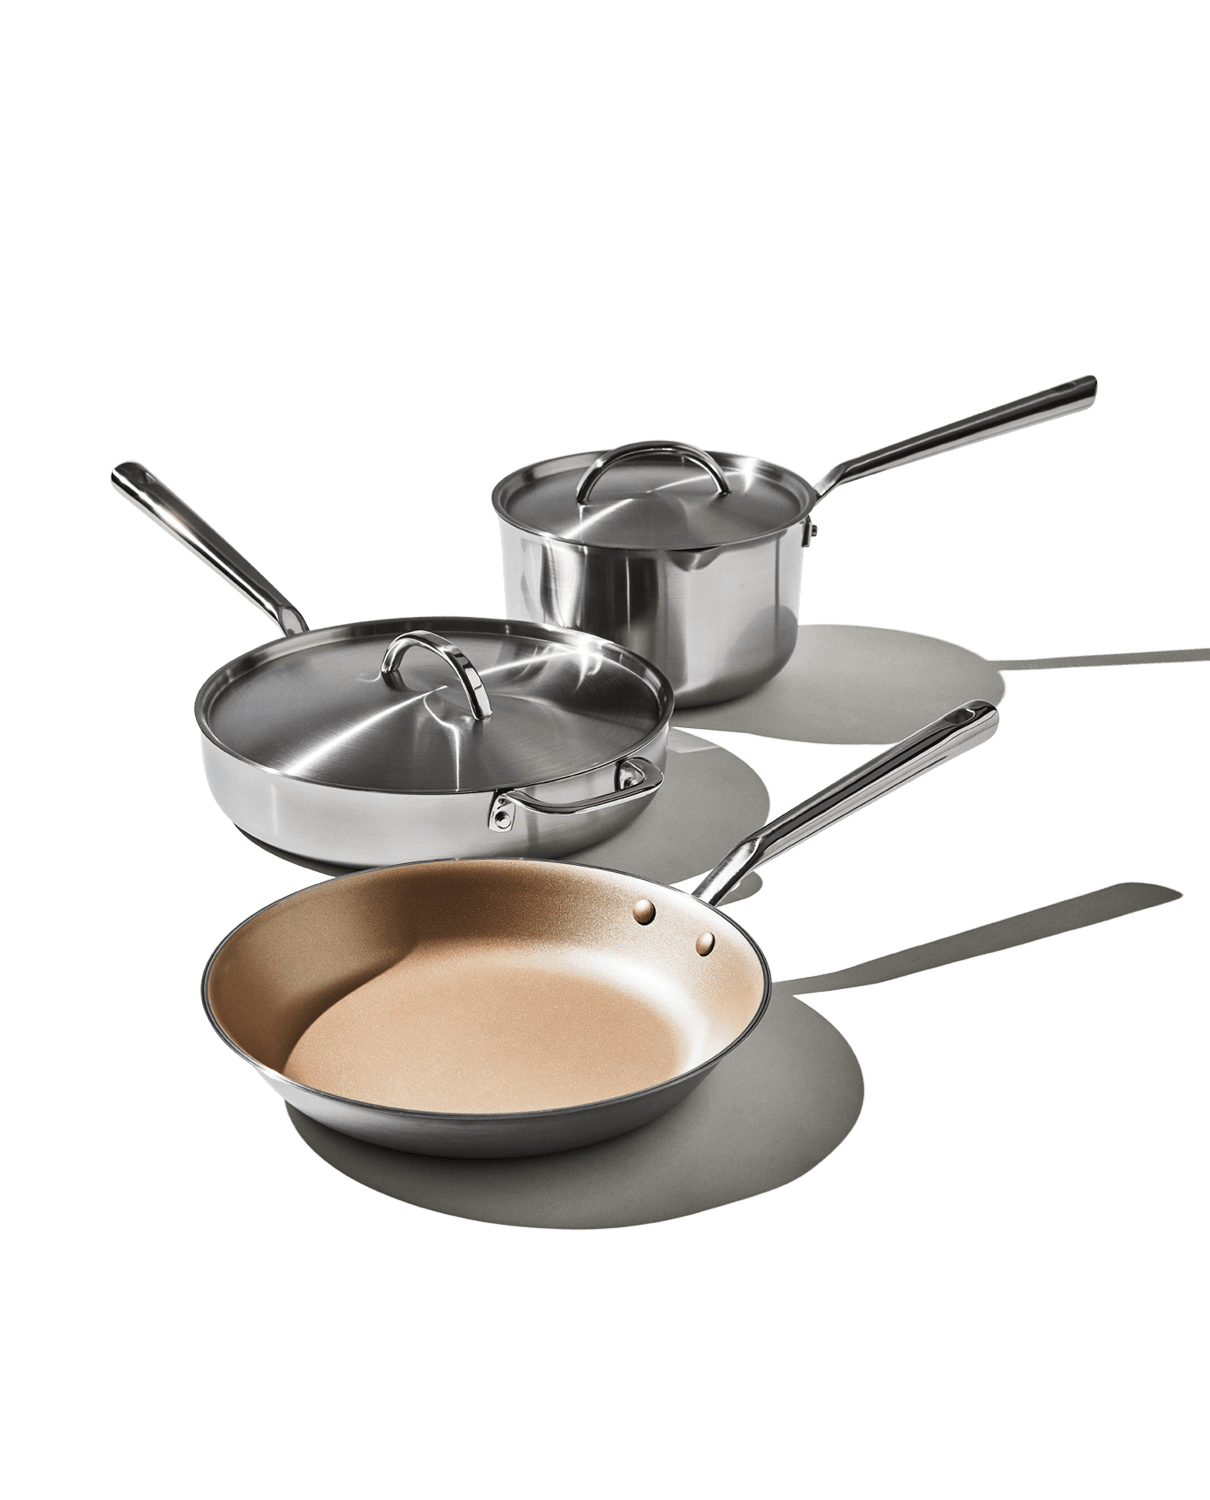 This #1 Bestseller kitchen cookware set on  is nonstick and